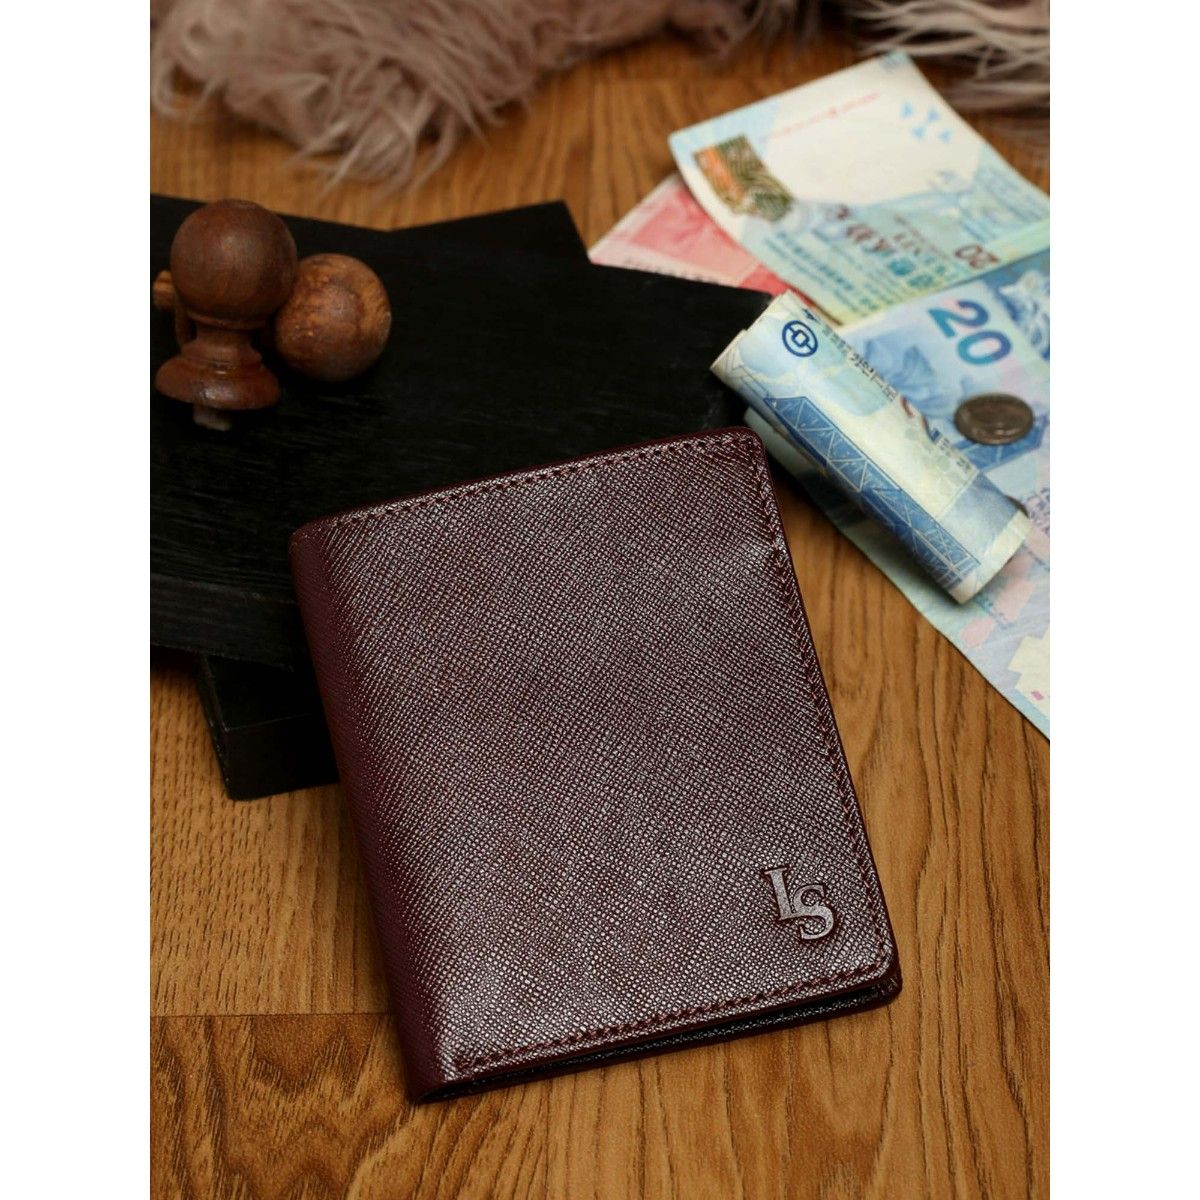 Louis Stitch Mens Rosewood Italian Saffiano Leather Passport Holder with Blocking Card Slots (Tan) At Nykaa, Best Beauty Products Online